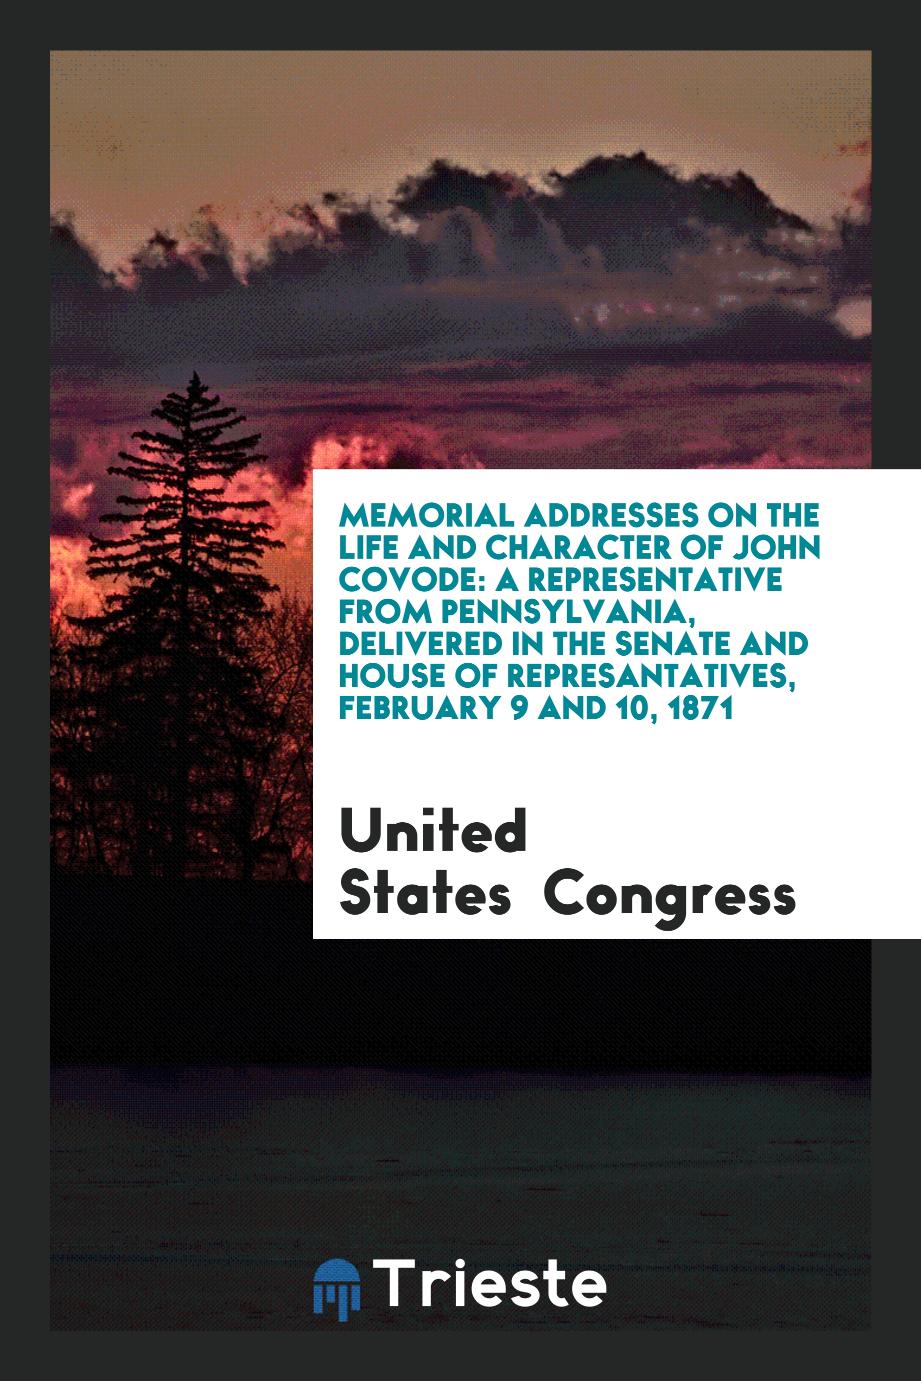 Memorial Addresses on the Life and Character of John Covode: A Representative from Pennsylvania, delivered in the senate and house of represantatives, February 9 and 10, 1871